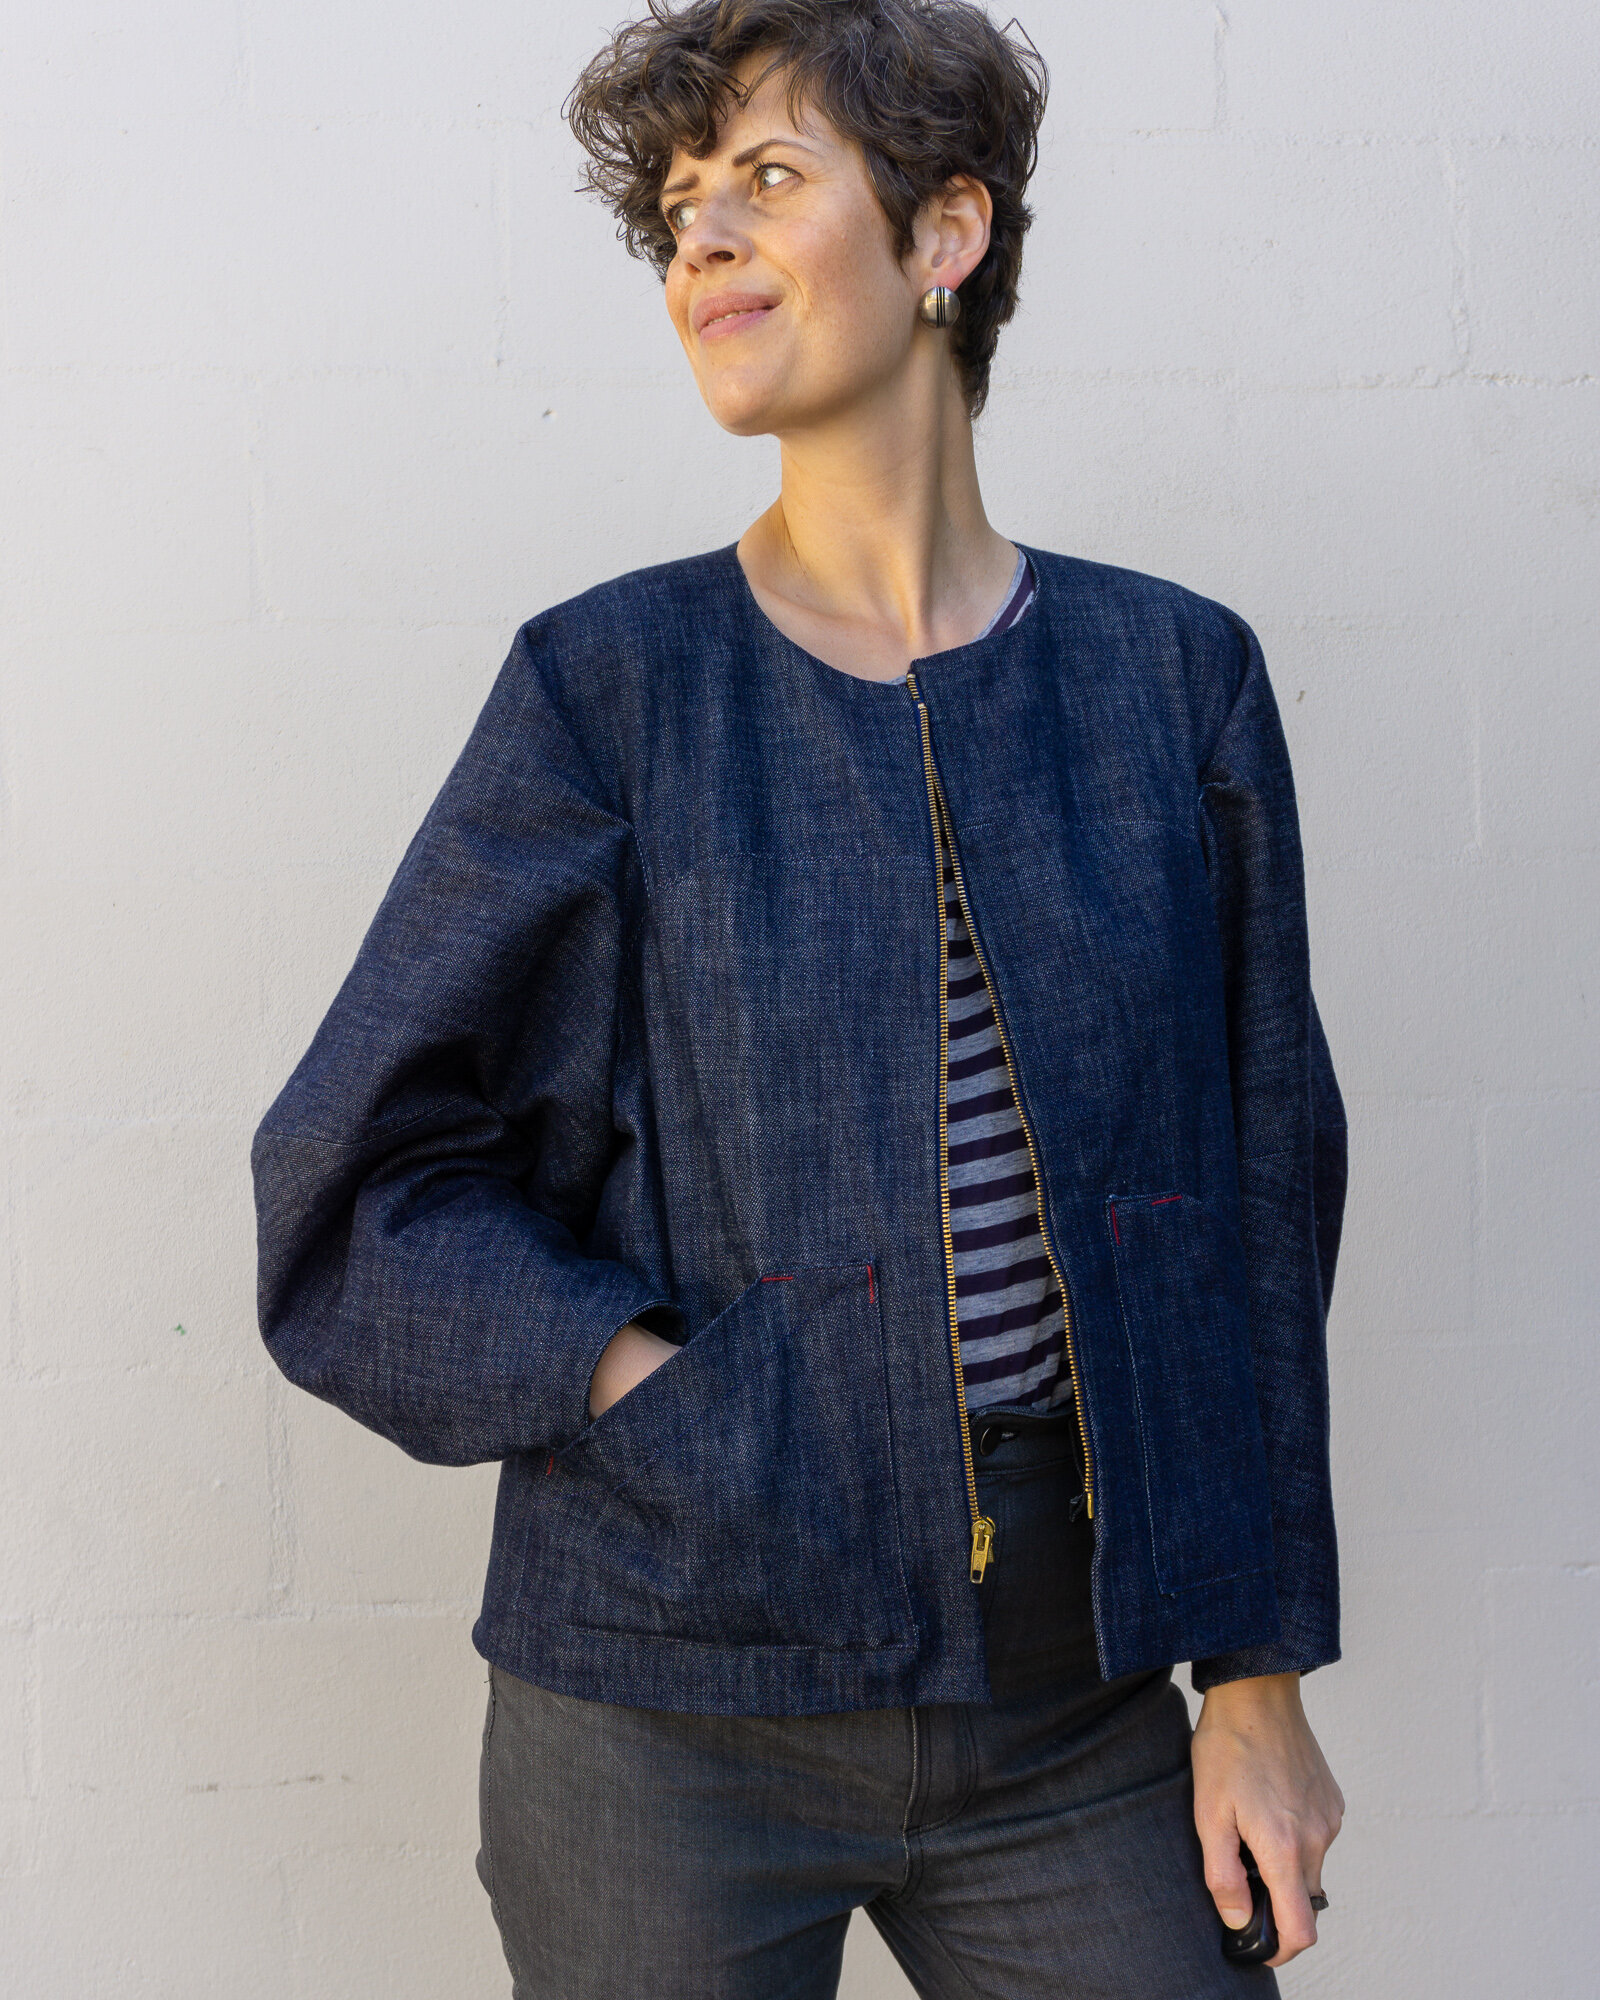 DIY Lined Denim Jacket - Review of the Falda Jacket by Pattern ...